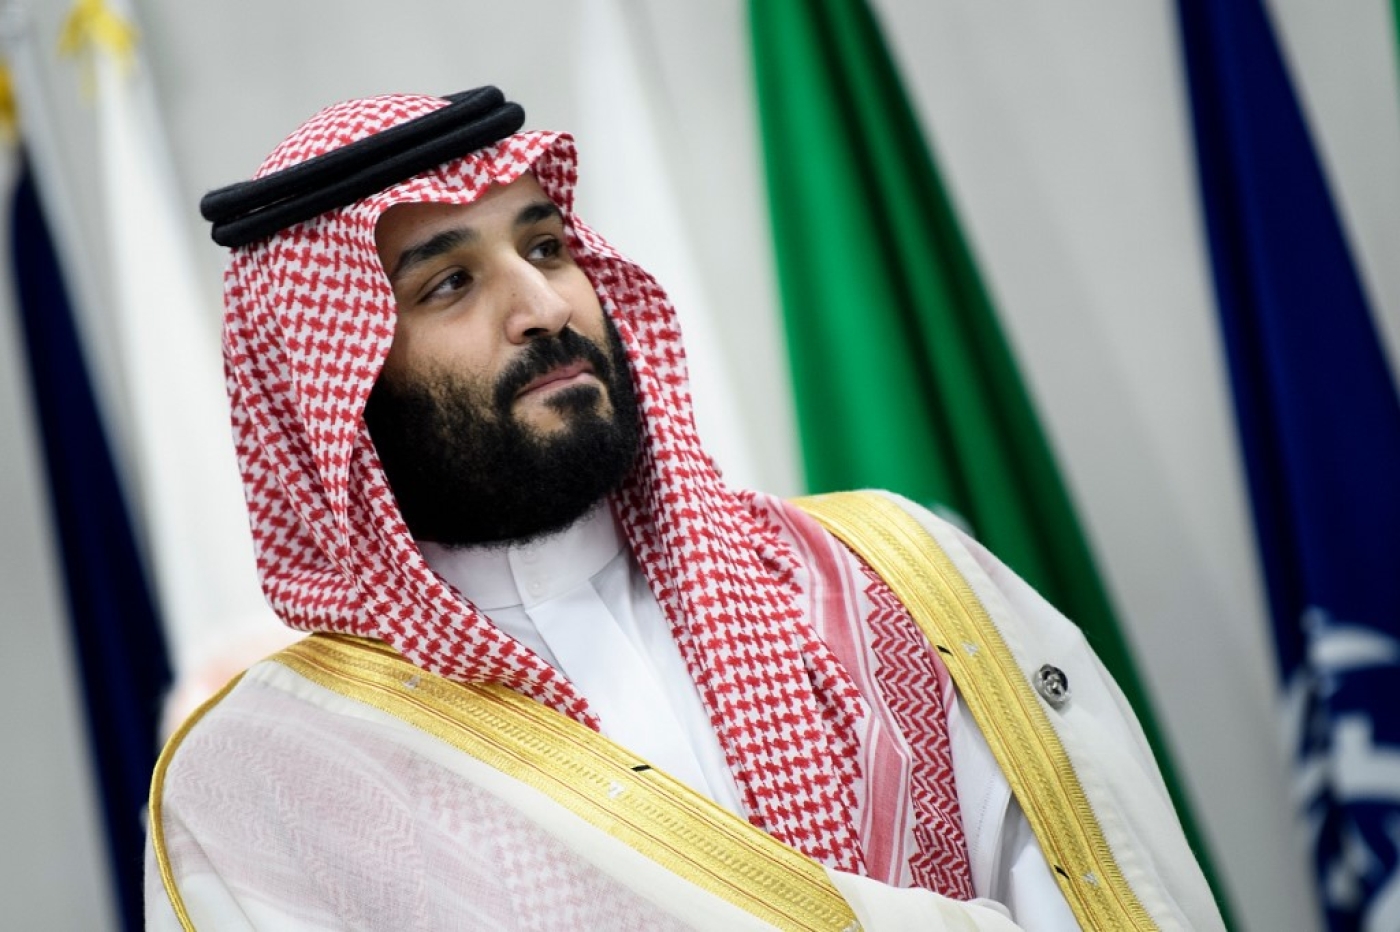 Jabri said that his deep knowledge of MBS and his activities has rendered him as a target for the crown prince.